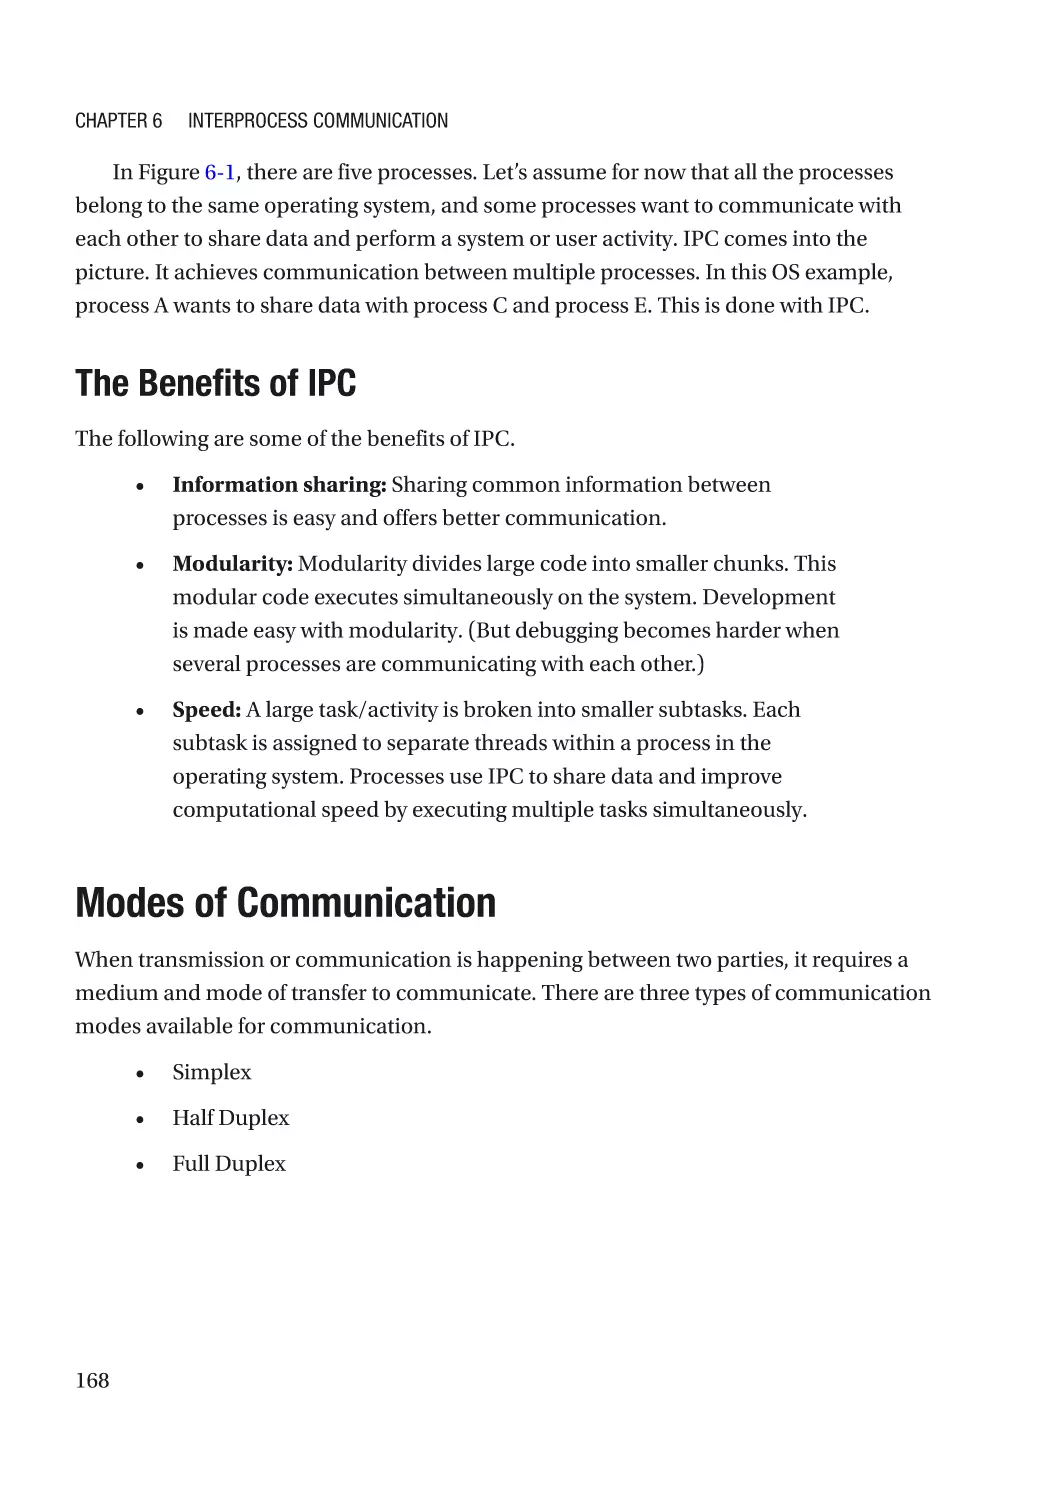 The Benefits of IPC
Modes of Communication